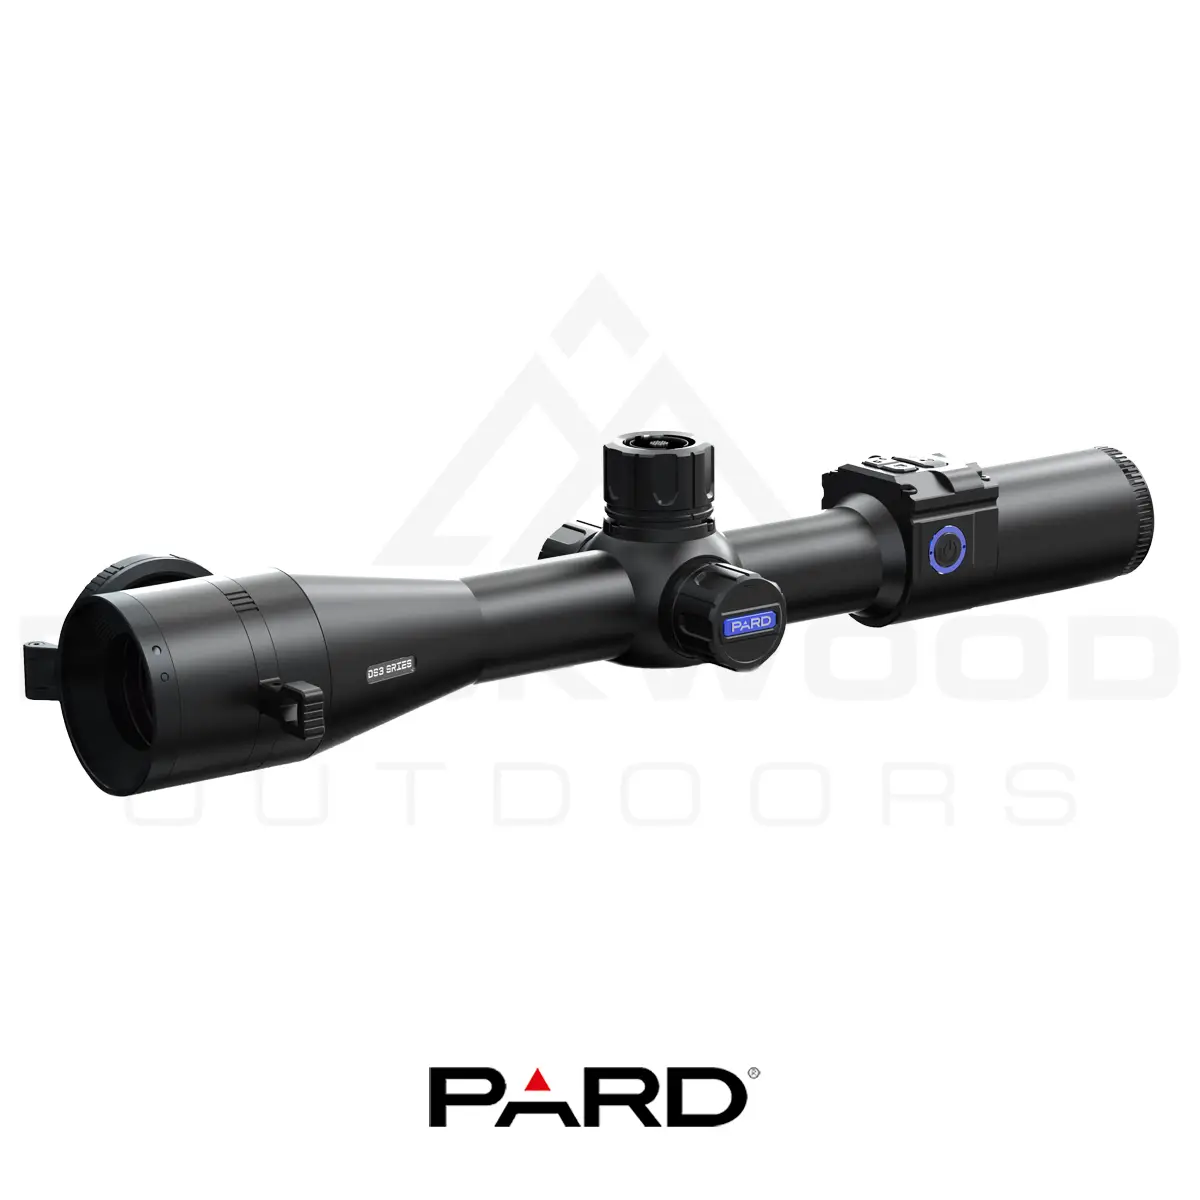 Pard DS35 70 Standard Night Vision